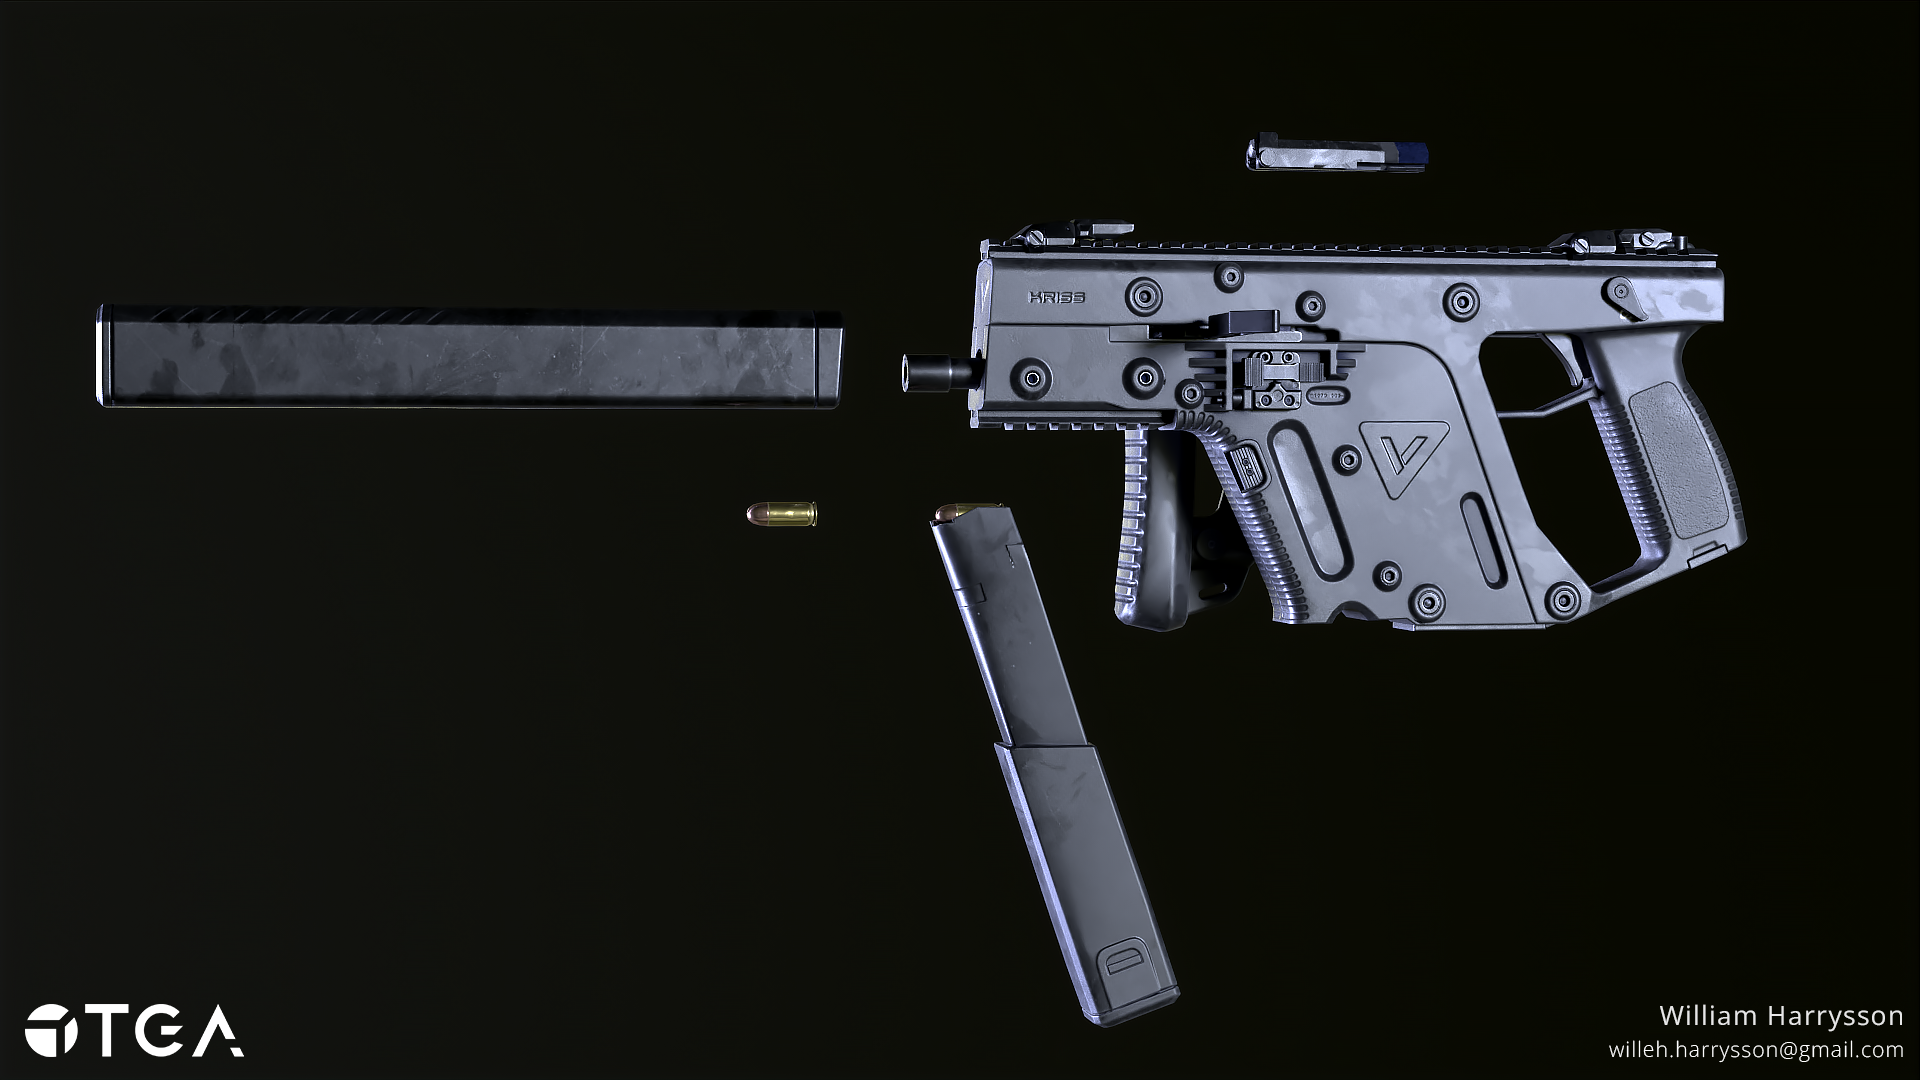 animateable parts iclude: folding stock, suppressor, trigger, magazine, Iron sights, bolt, buttons,